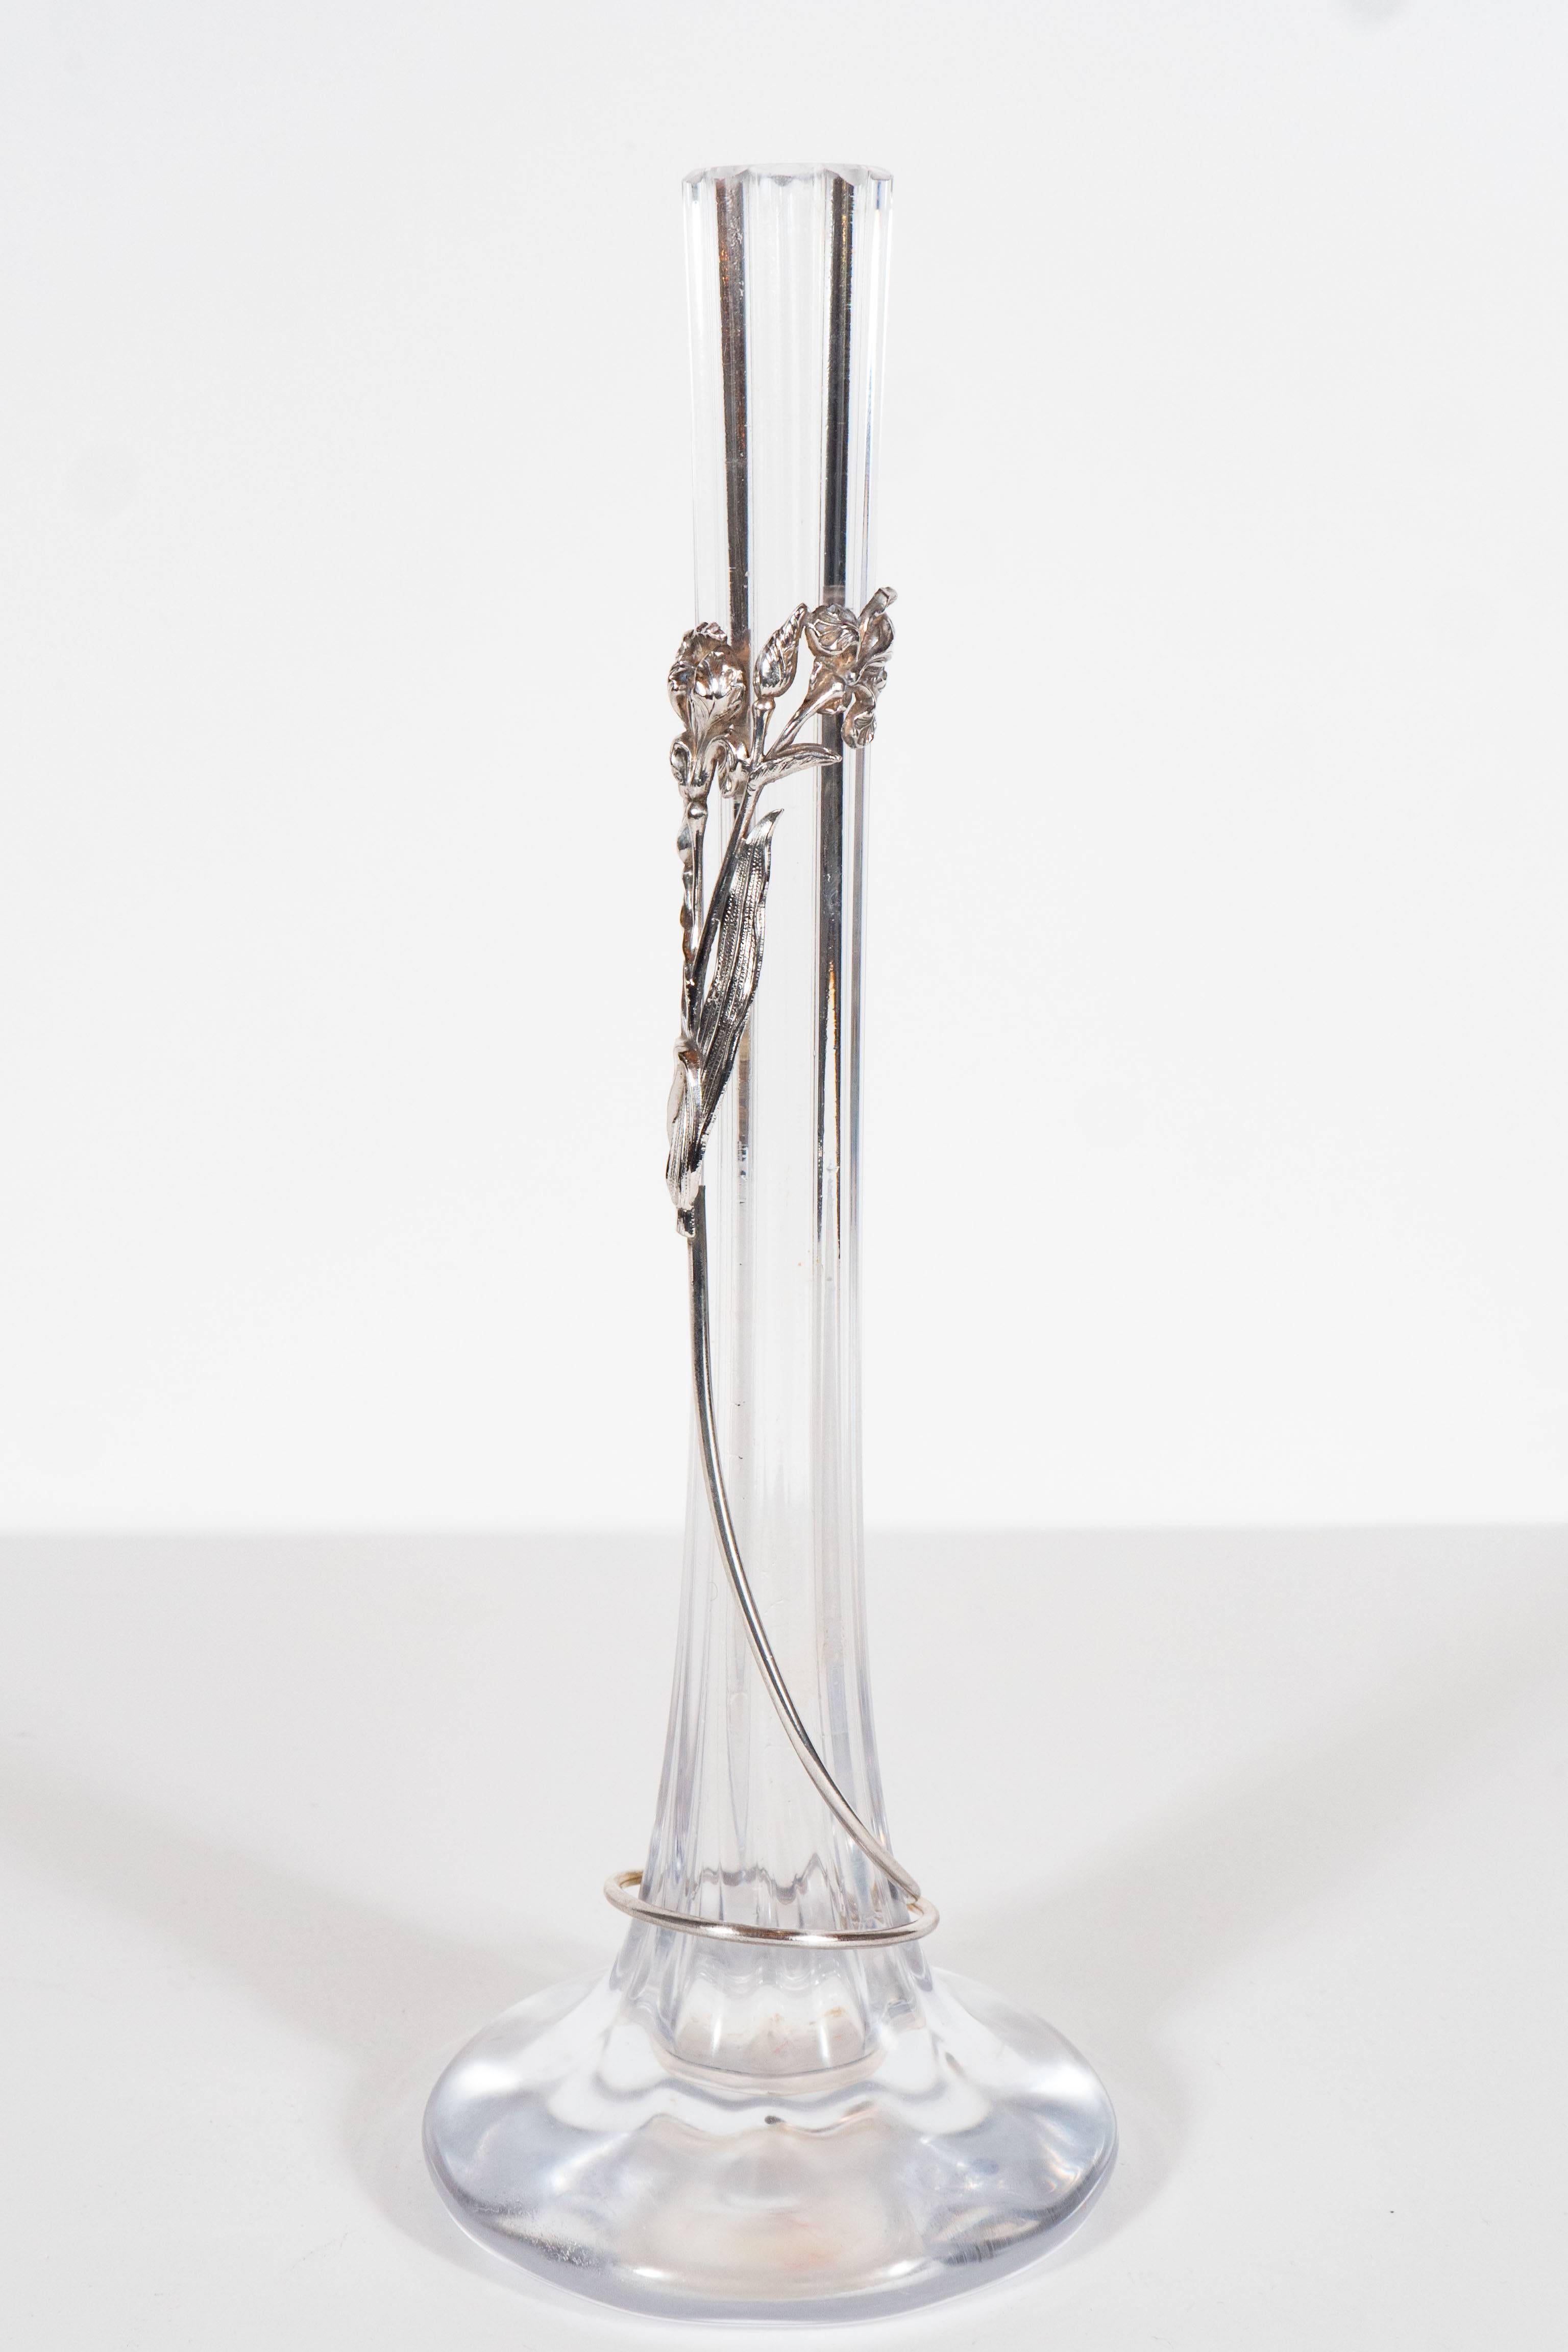 This gorgeous vase features a tapered cylindrical opening into a bulbous bottom. There is a delicate day lily plant in patined sterling silver climbing the neck of the vase. This is a magnificent example of Art Nouveau design at its best, and would